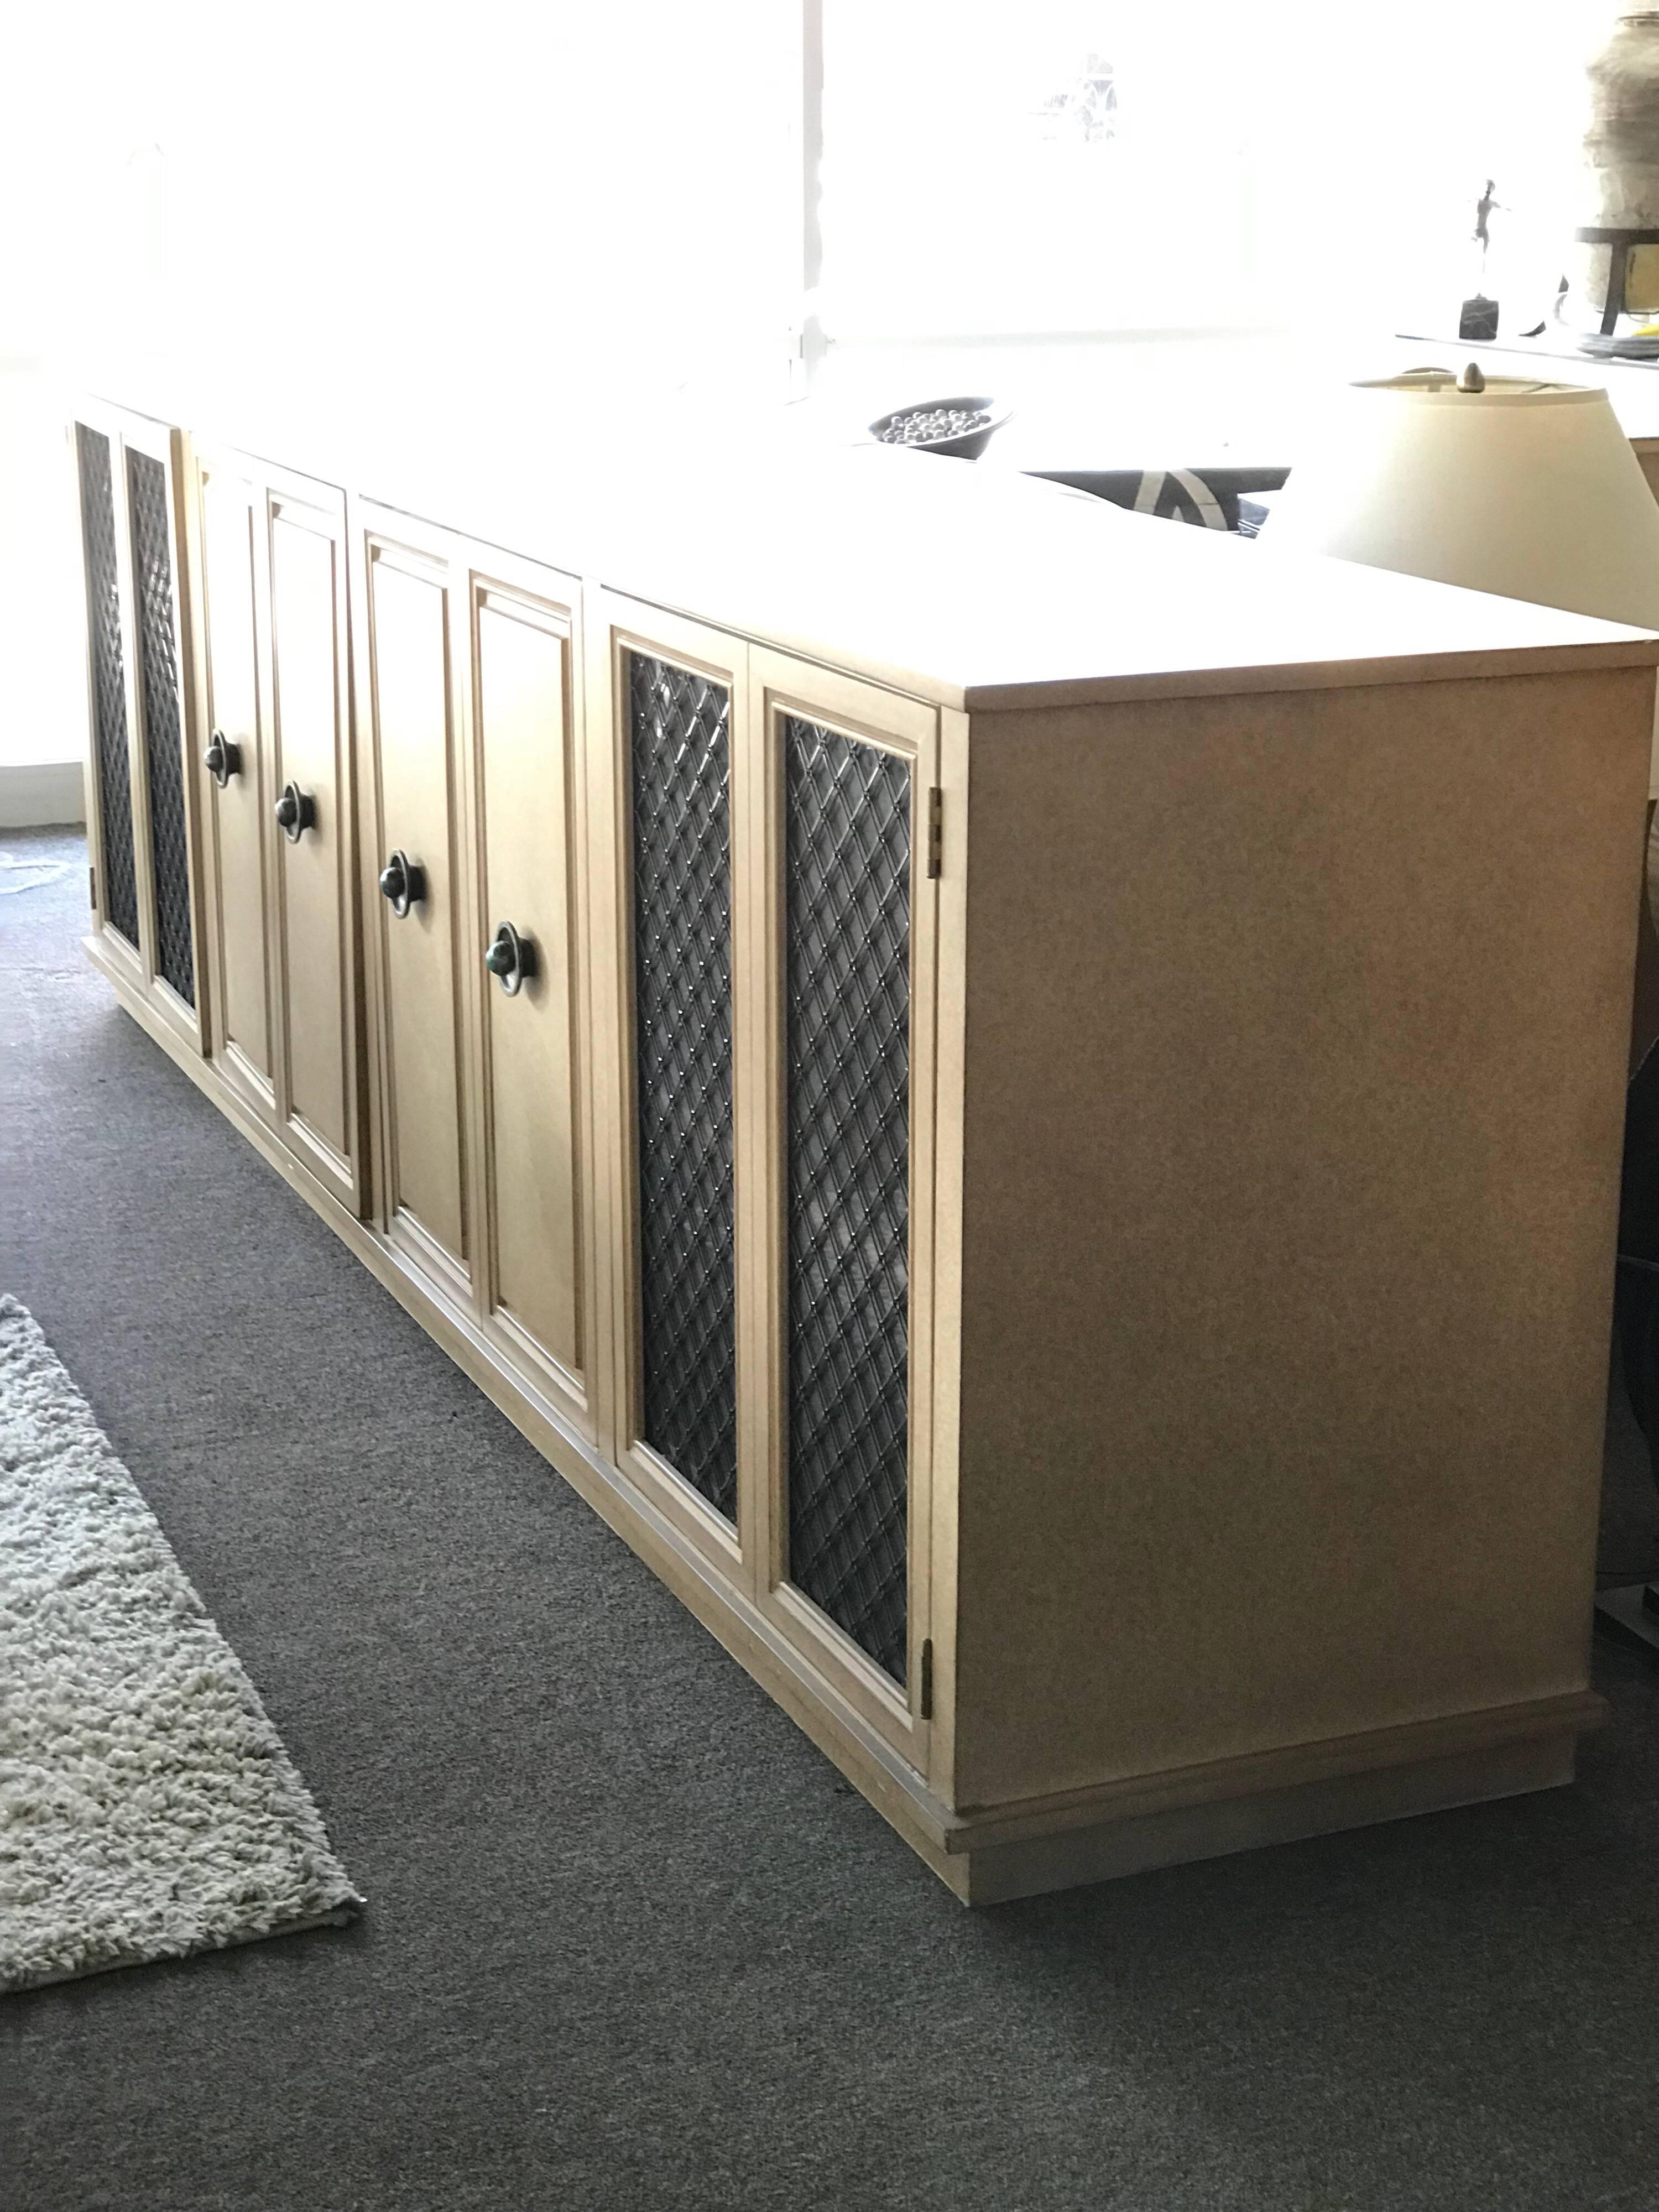 This amazing 9 ft long credenza was from a vintage chic and glamorous Palm Springs Estate that was decorated by a Beverly Hills designer. It is modern but also very glamorous a la Hollywood Regency style of William 